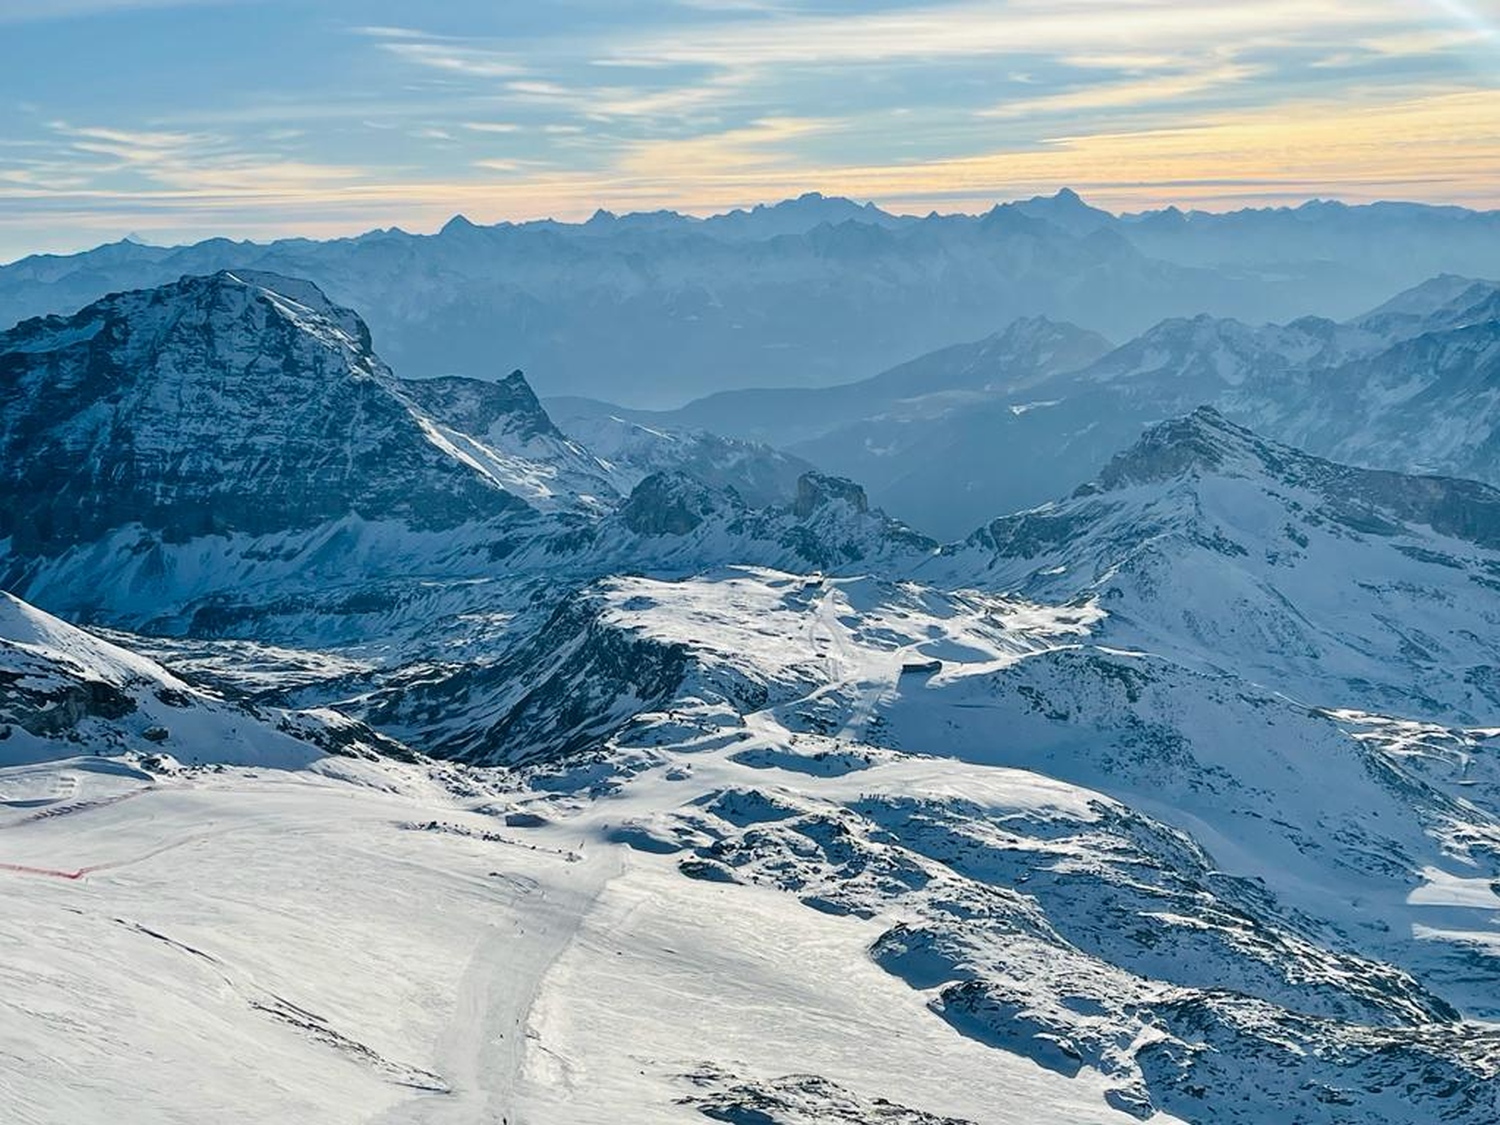 Landscape image of ski slope with mountains in background - Cervinia, Italy